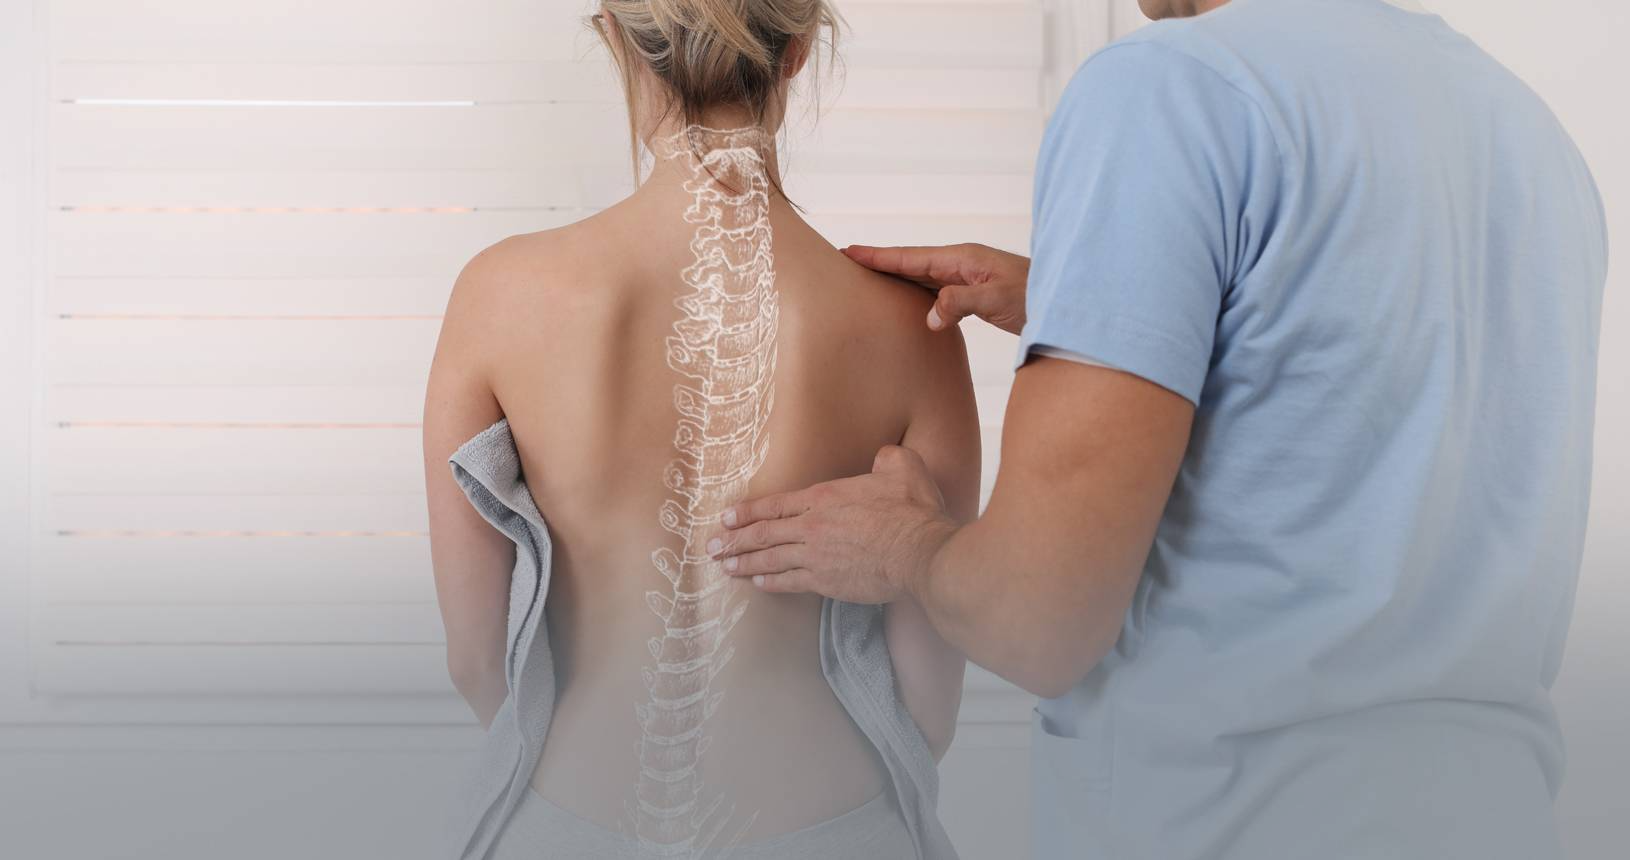 How Can Poor Posture Result in Back Pain?